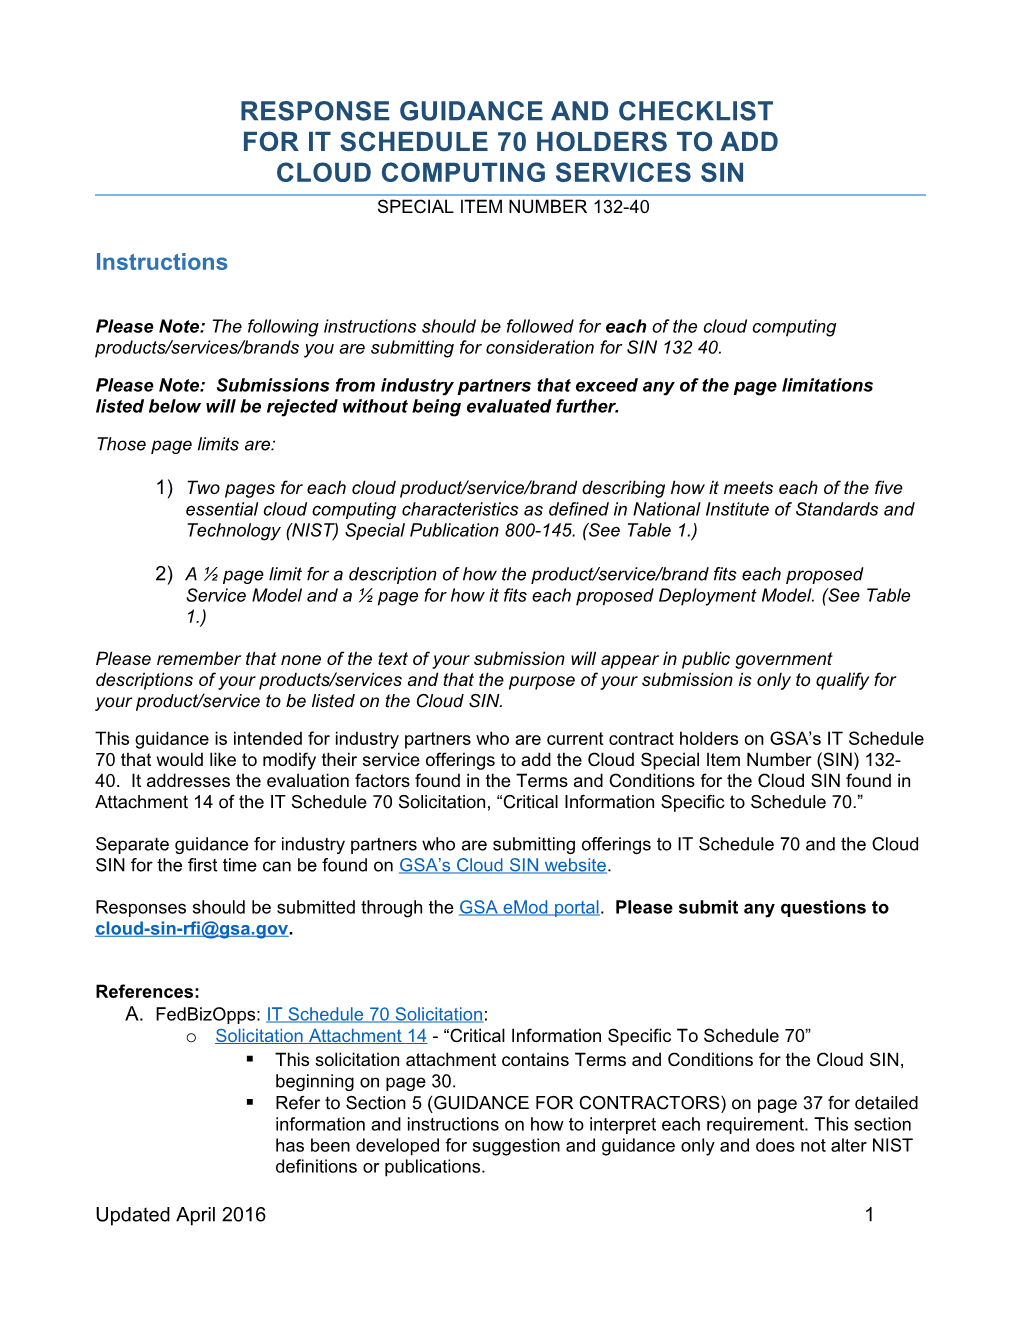 Response Guidance for Modifications - Cloud SIN